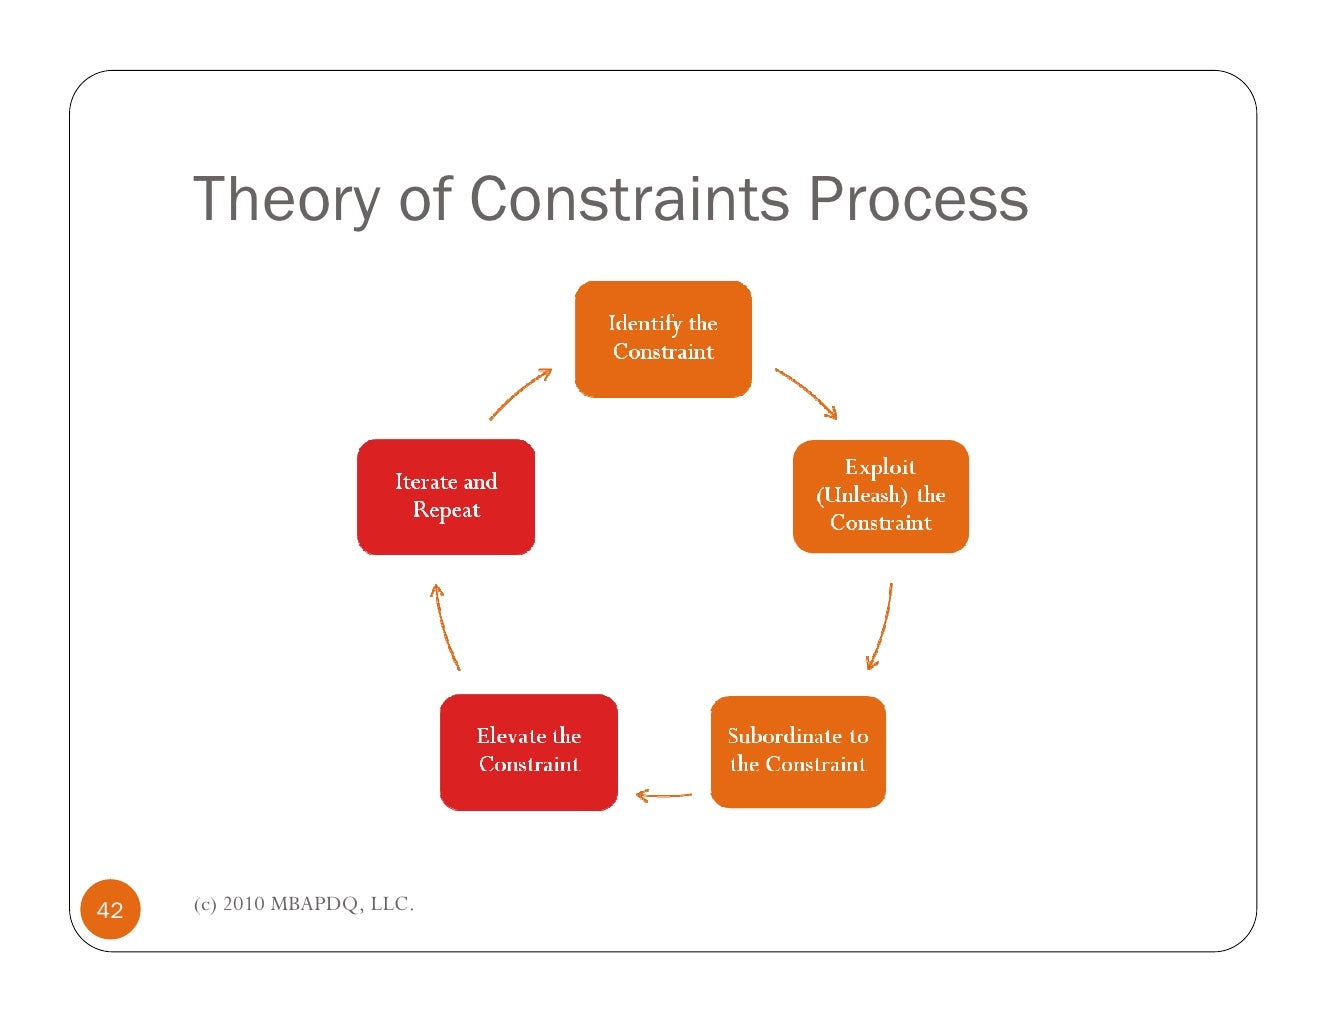 case study theory of constraints